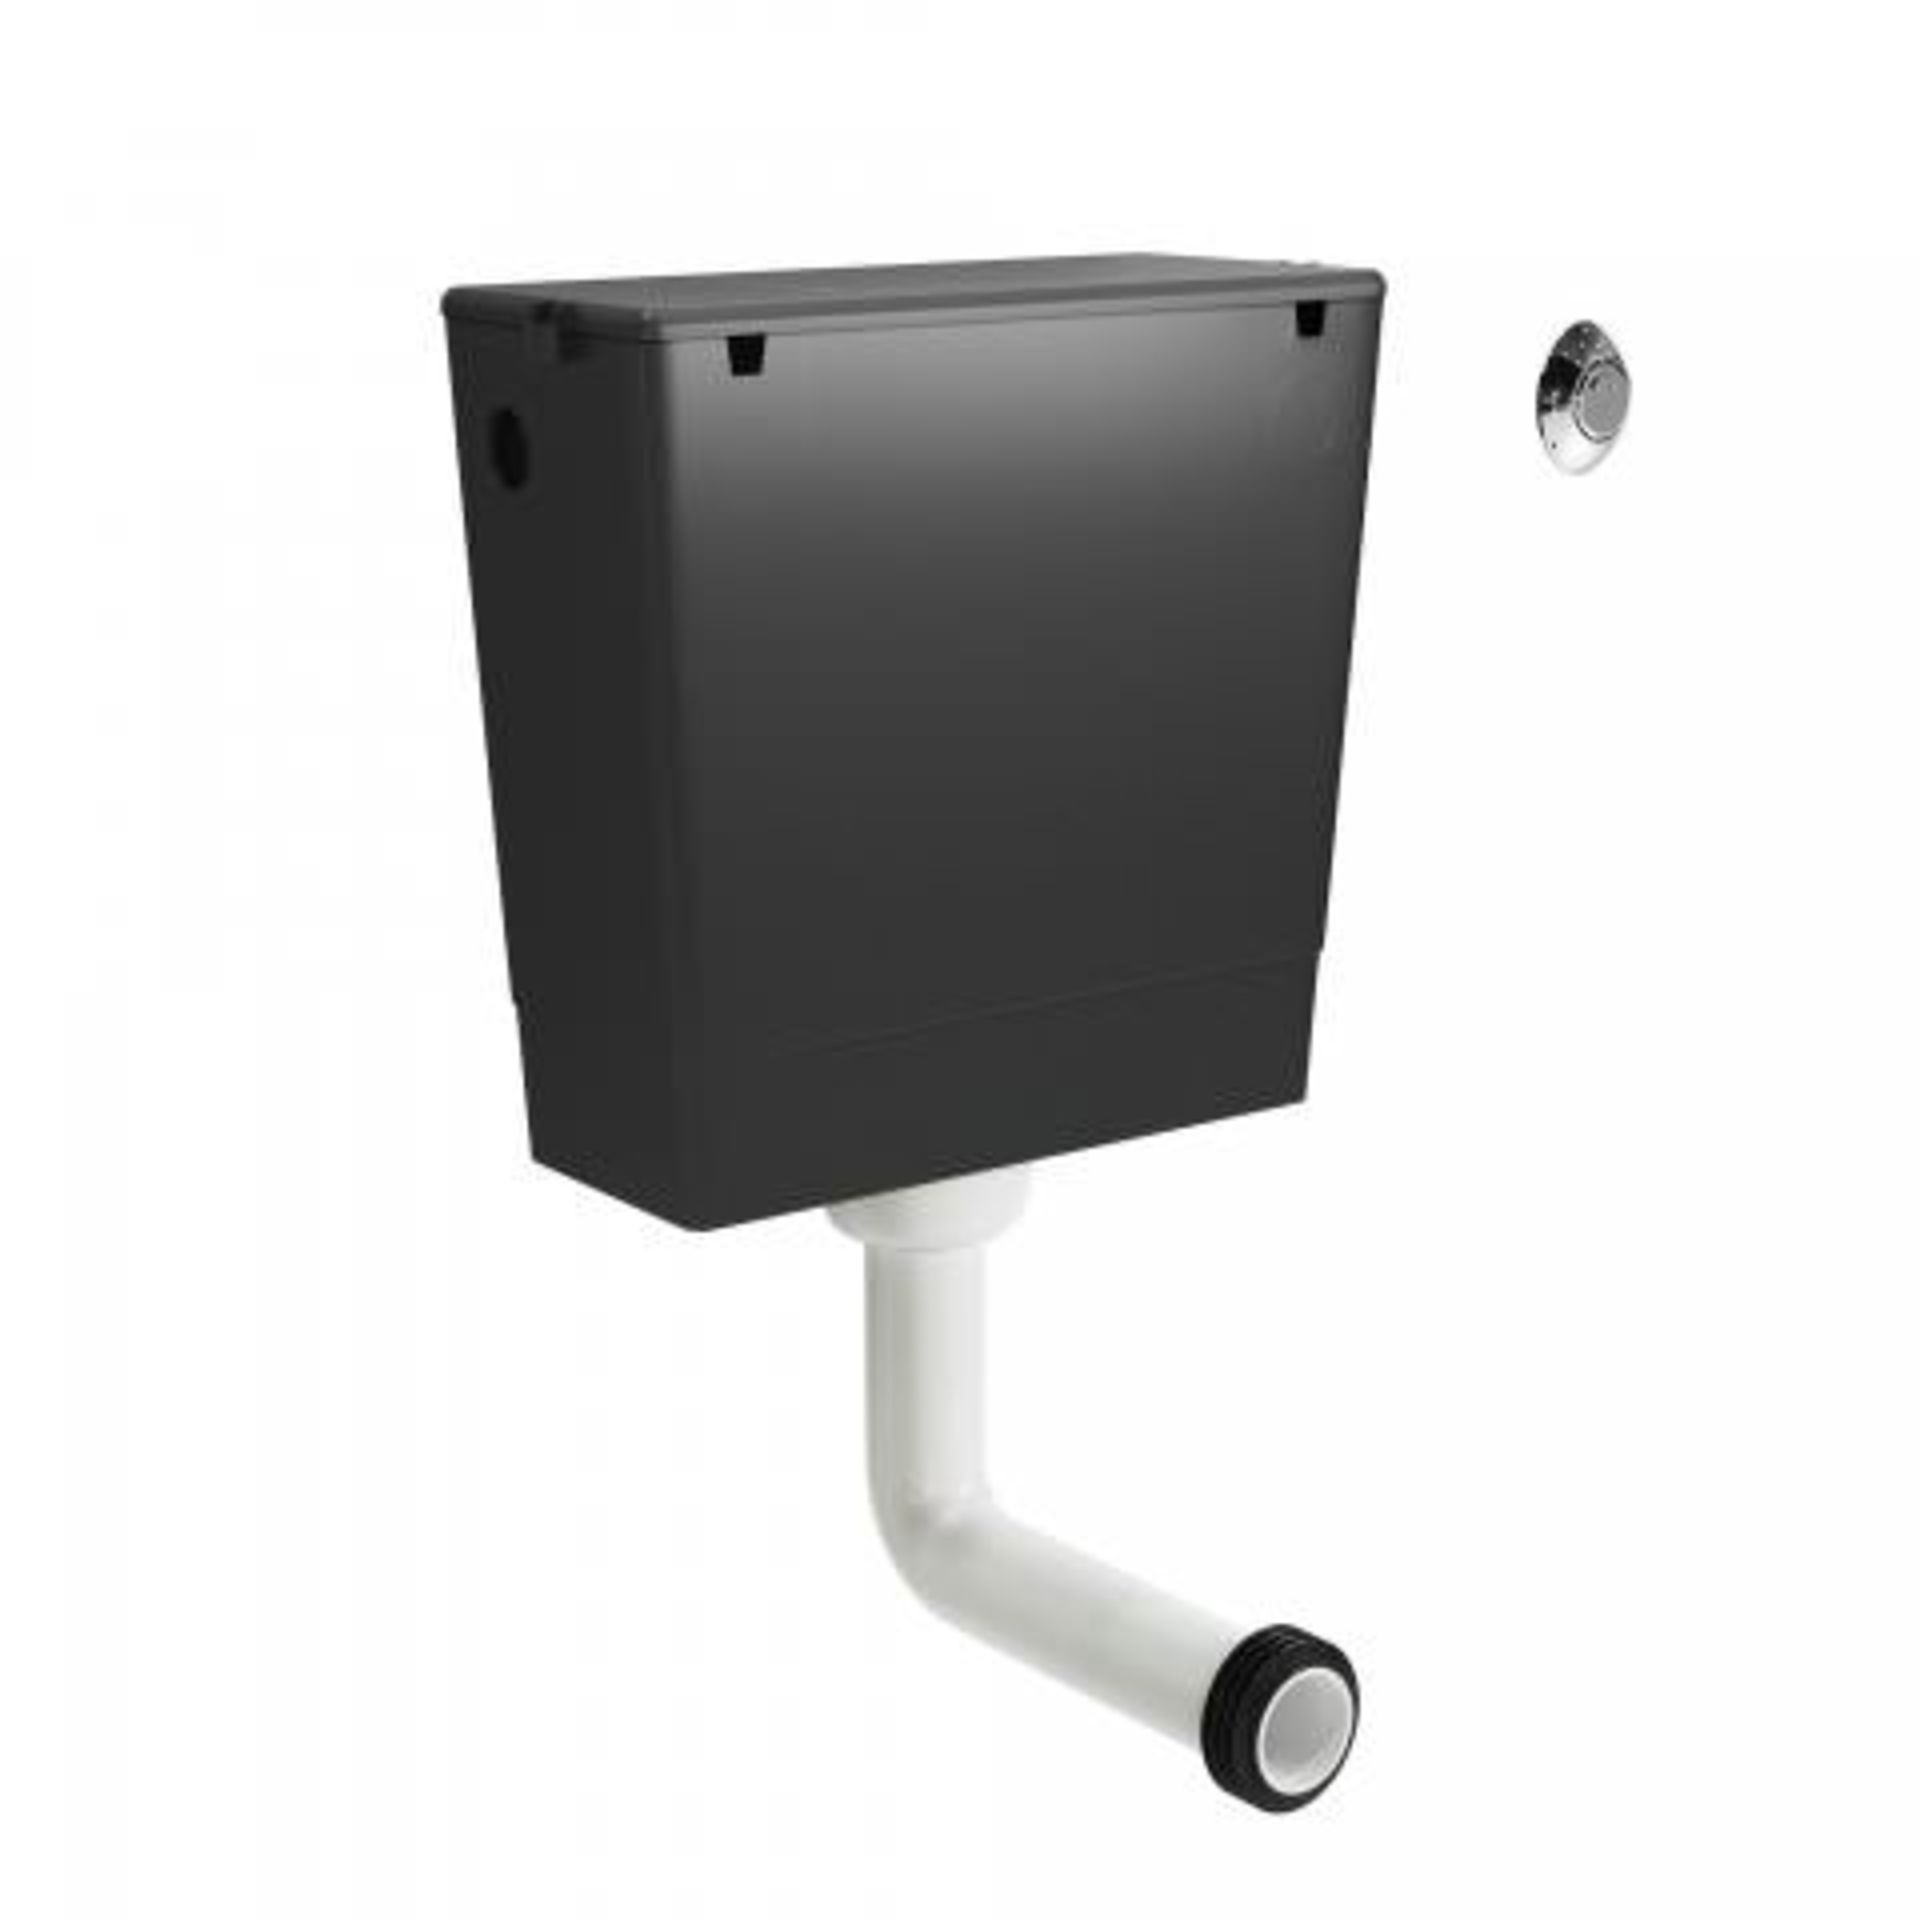 Wirquin Dual Flush Concealed Cistern. RRP £69.99. This Dual Flush Concealed Cistern is designe...